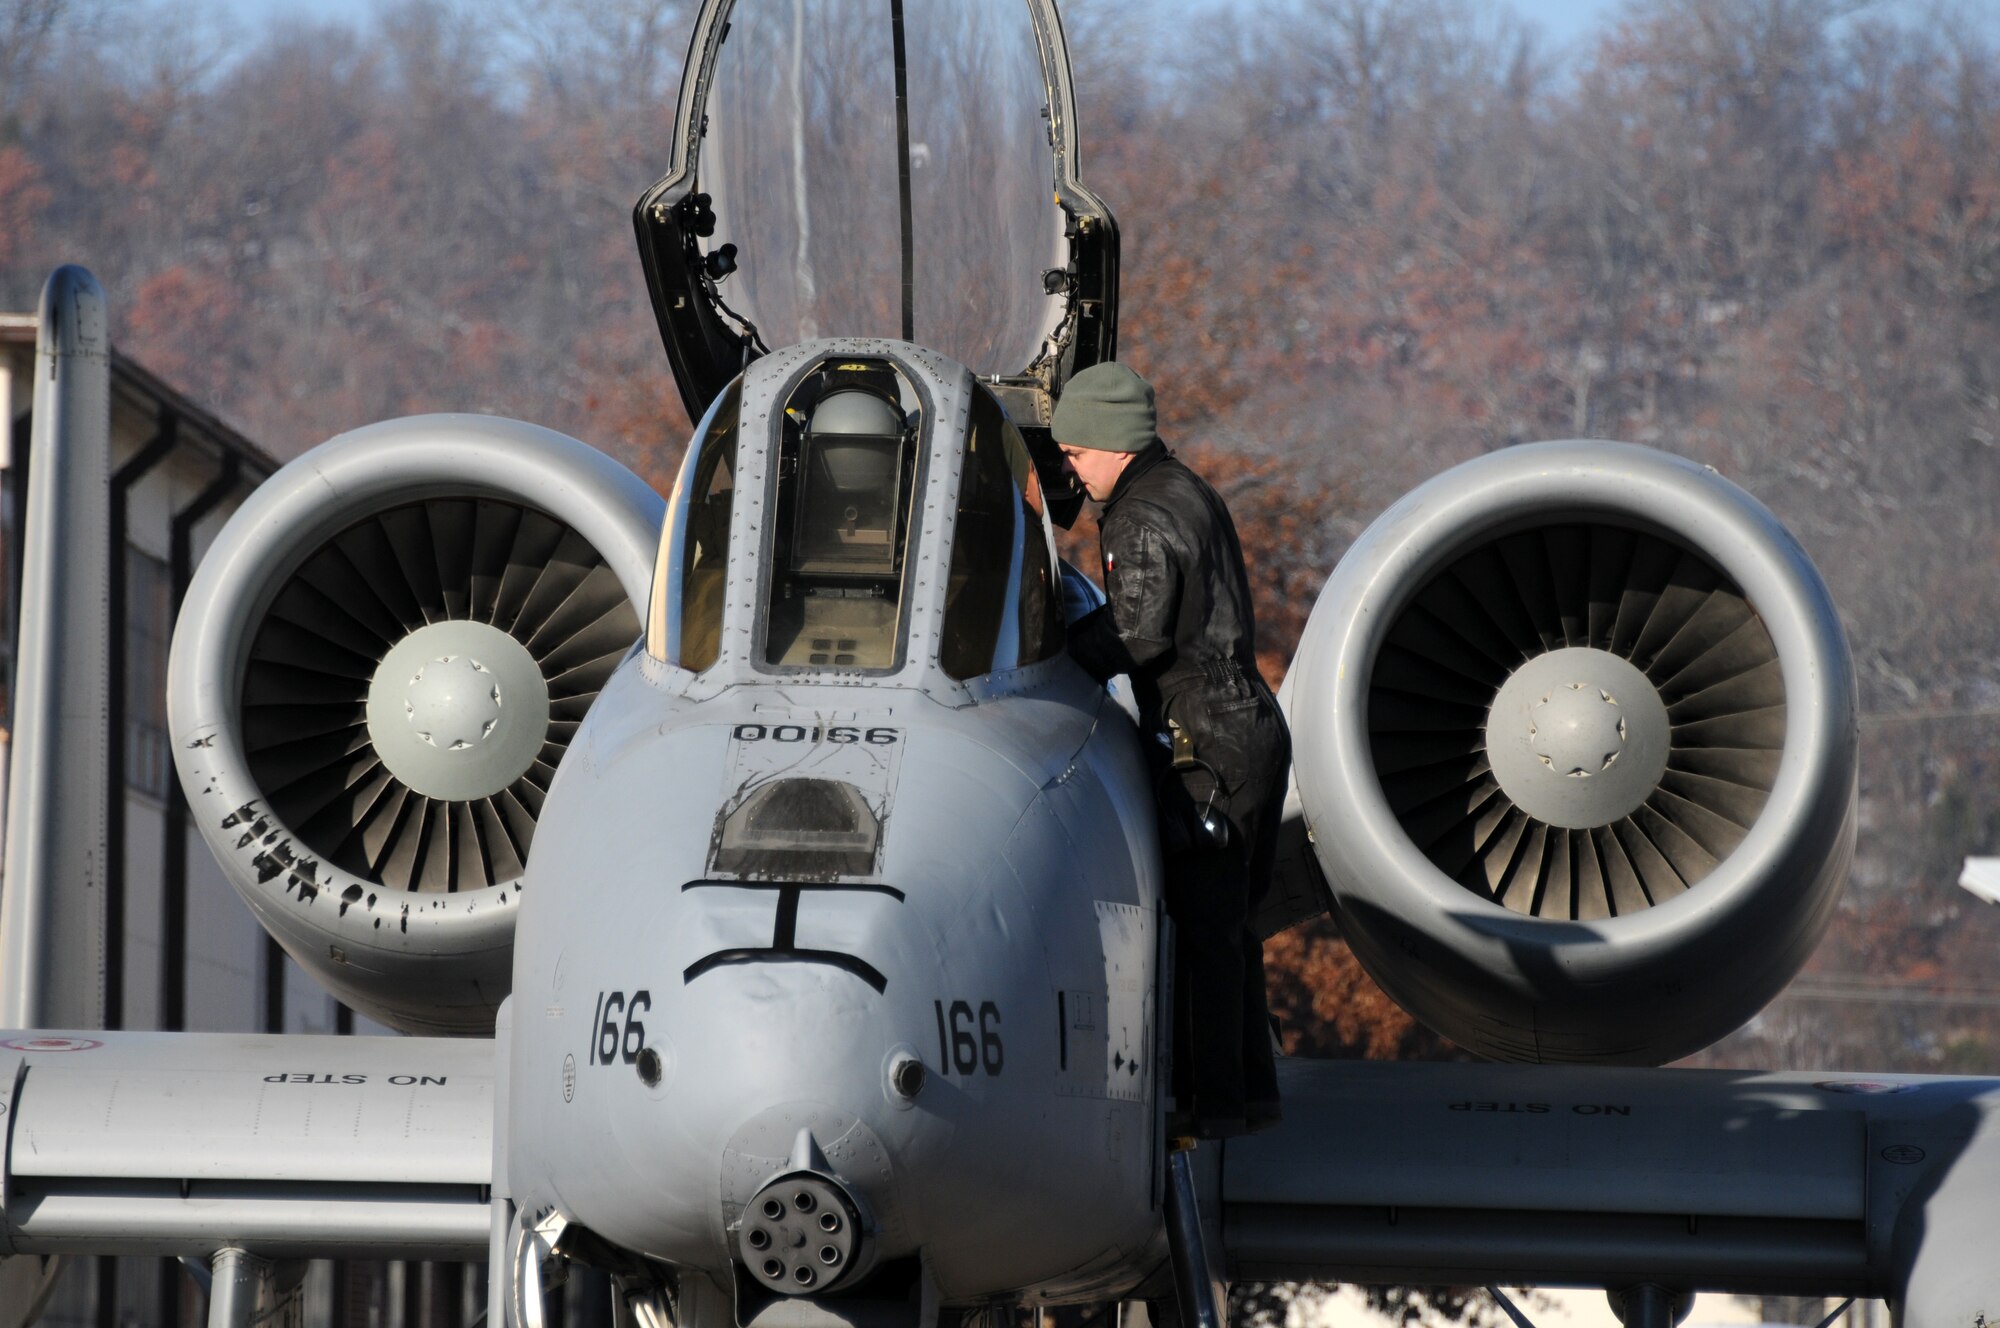 Tech. Sgt. Chris Cooper, a crew chief with the 188th Aircraft Maintenance Squadron, conducts preflight inspections on an A-10C Thunderbolt II (Tail No. 166).  The A-10 was one of two Warthogs from the 188th Fighter Wing's Ebbing Air National Guard Base in Fort Smith, Ark., delivered to Moody Air Force Base, Ga., Dec. 12, 2013, as part of the 188th’s on-going conversion from a fighter mission to remotely piloted aircraft and Intelligence mission, which will include a space-focused targeting squadron. (U.S. Air National Guard photo by Tech Sgt. Josh Lewis/188th Fighter Wing Public Affairs)